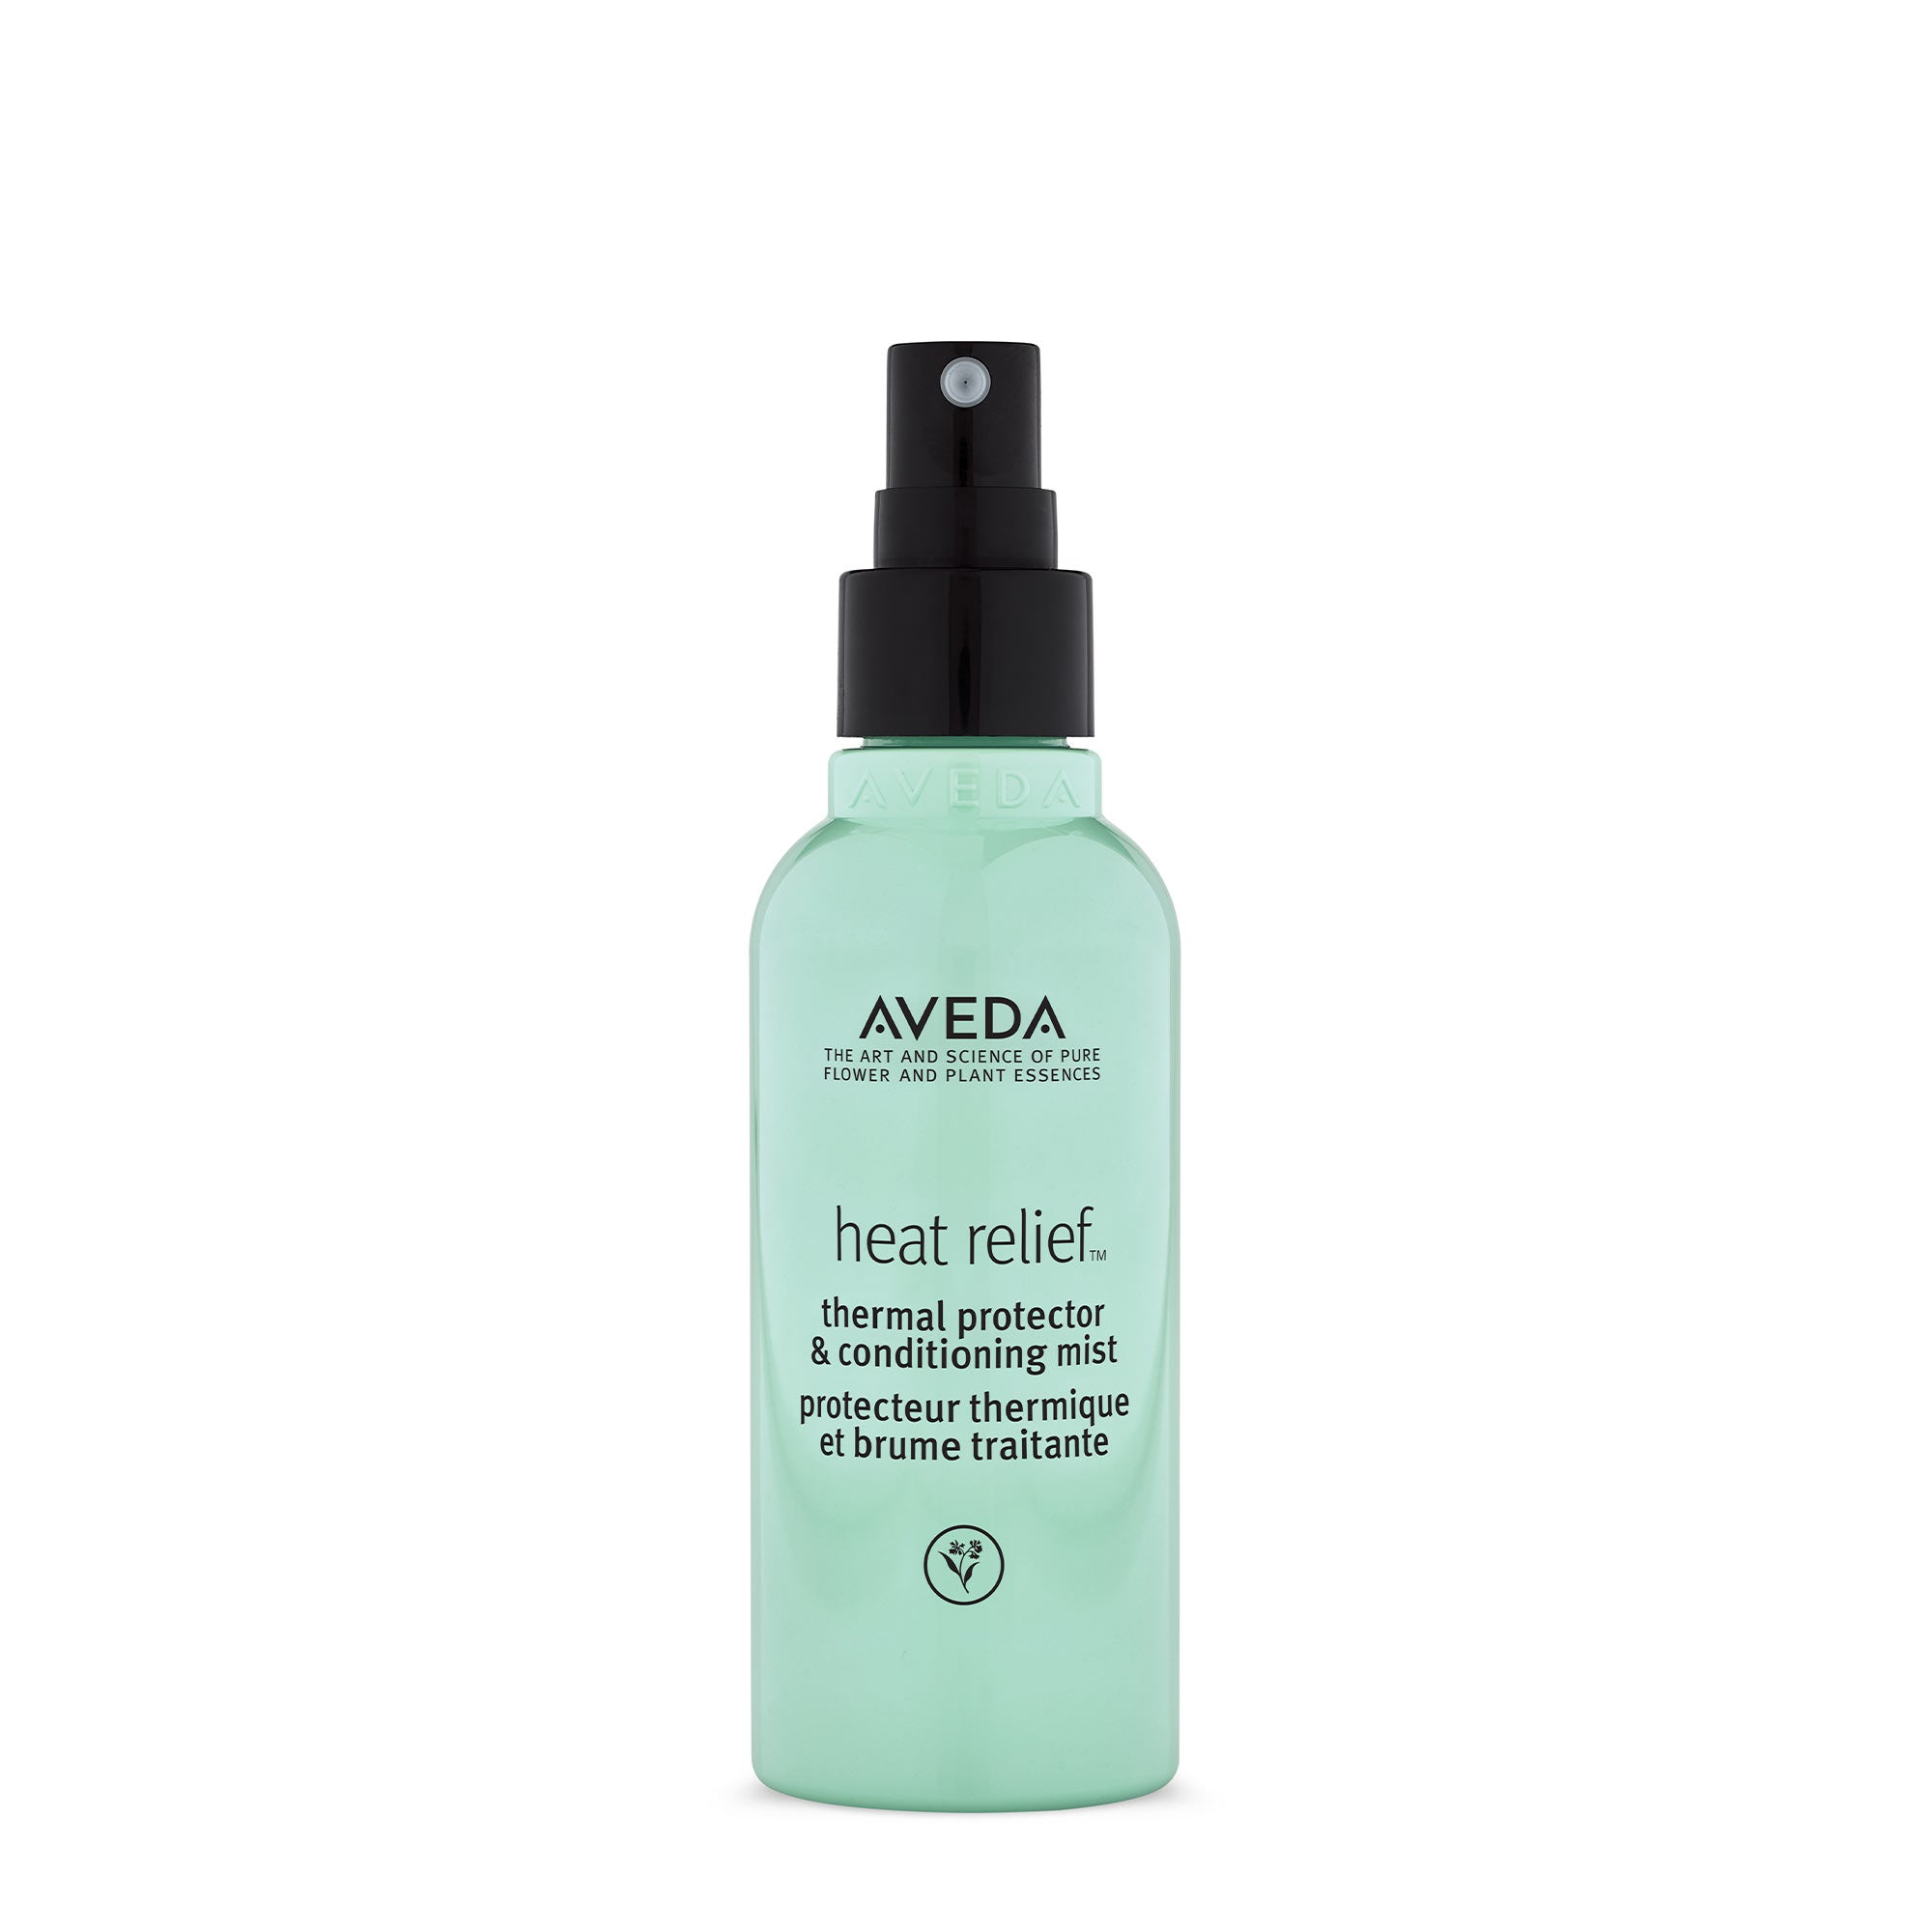 Aveda Thermal Protector & Conditioning Mist 100ml